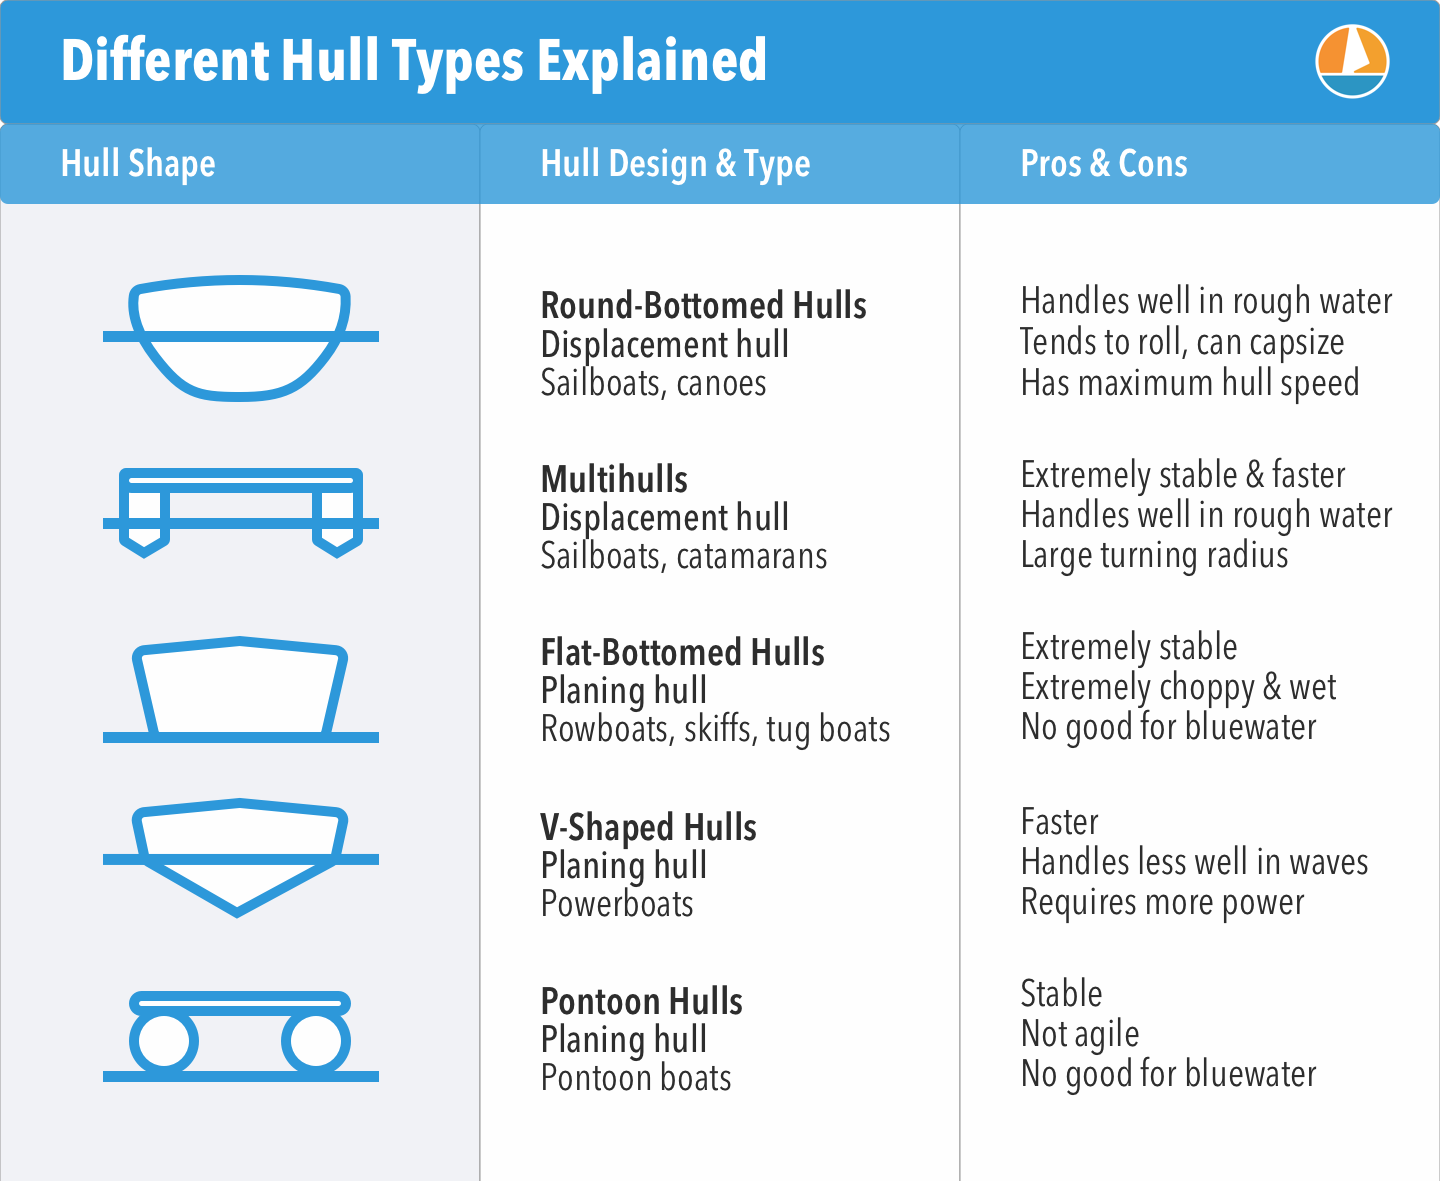 https://improvesailing.com/media/pages/guides/boat-hull-types/891269003-1578607525/boat-hulls-explained-large.png